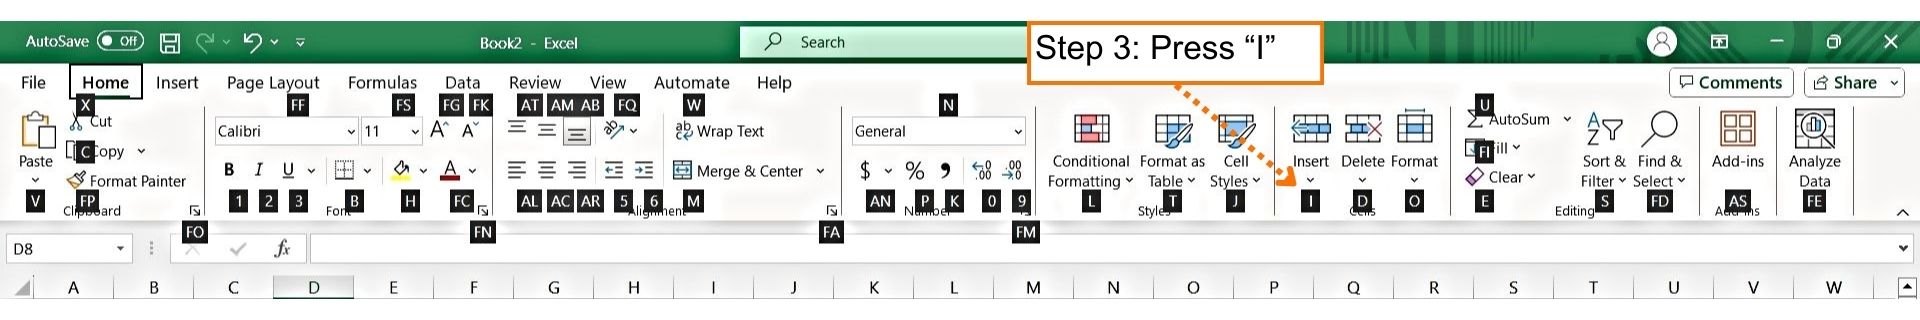 Discover Excel Shortcuts - Step 2 - Excel Hippo, Excel Shortcuts Cheat Sheet